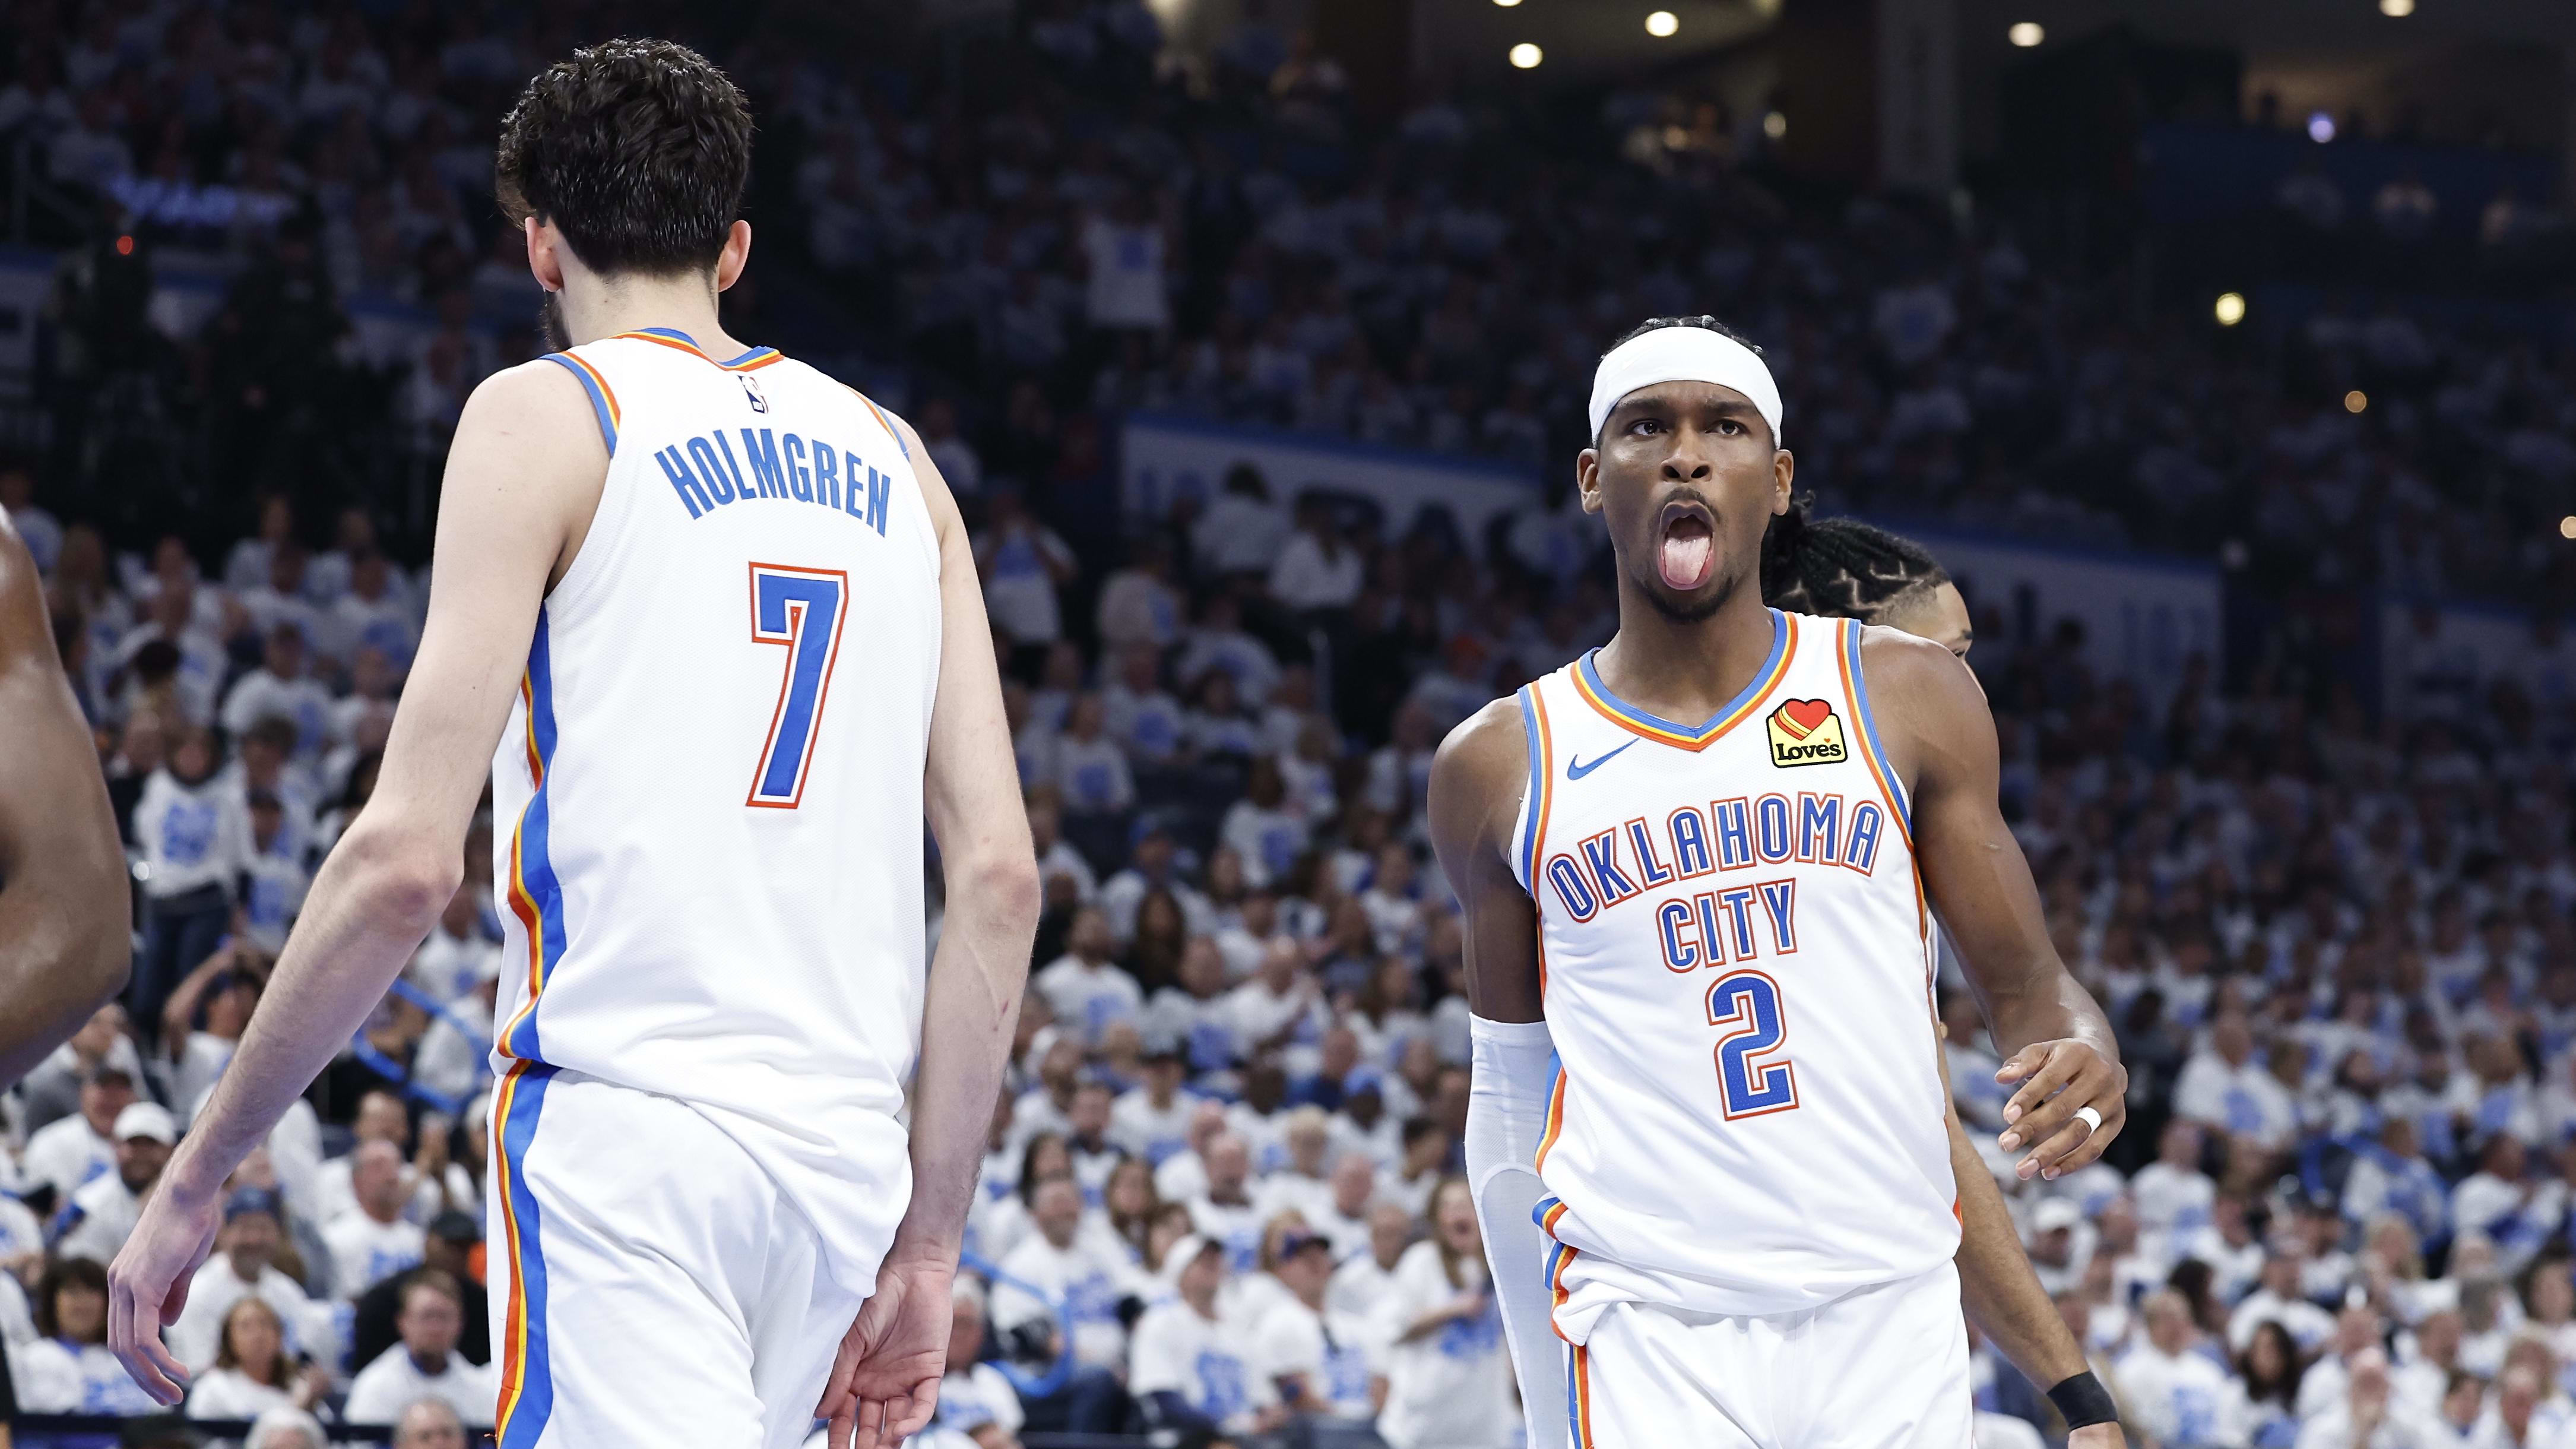 Oklahoma City starts postseason undefeated at home - leads New Orleans 2-0